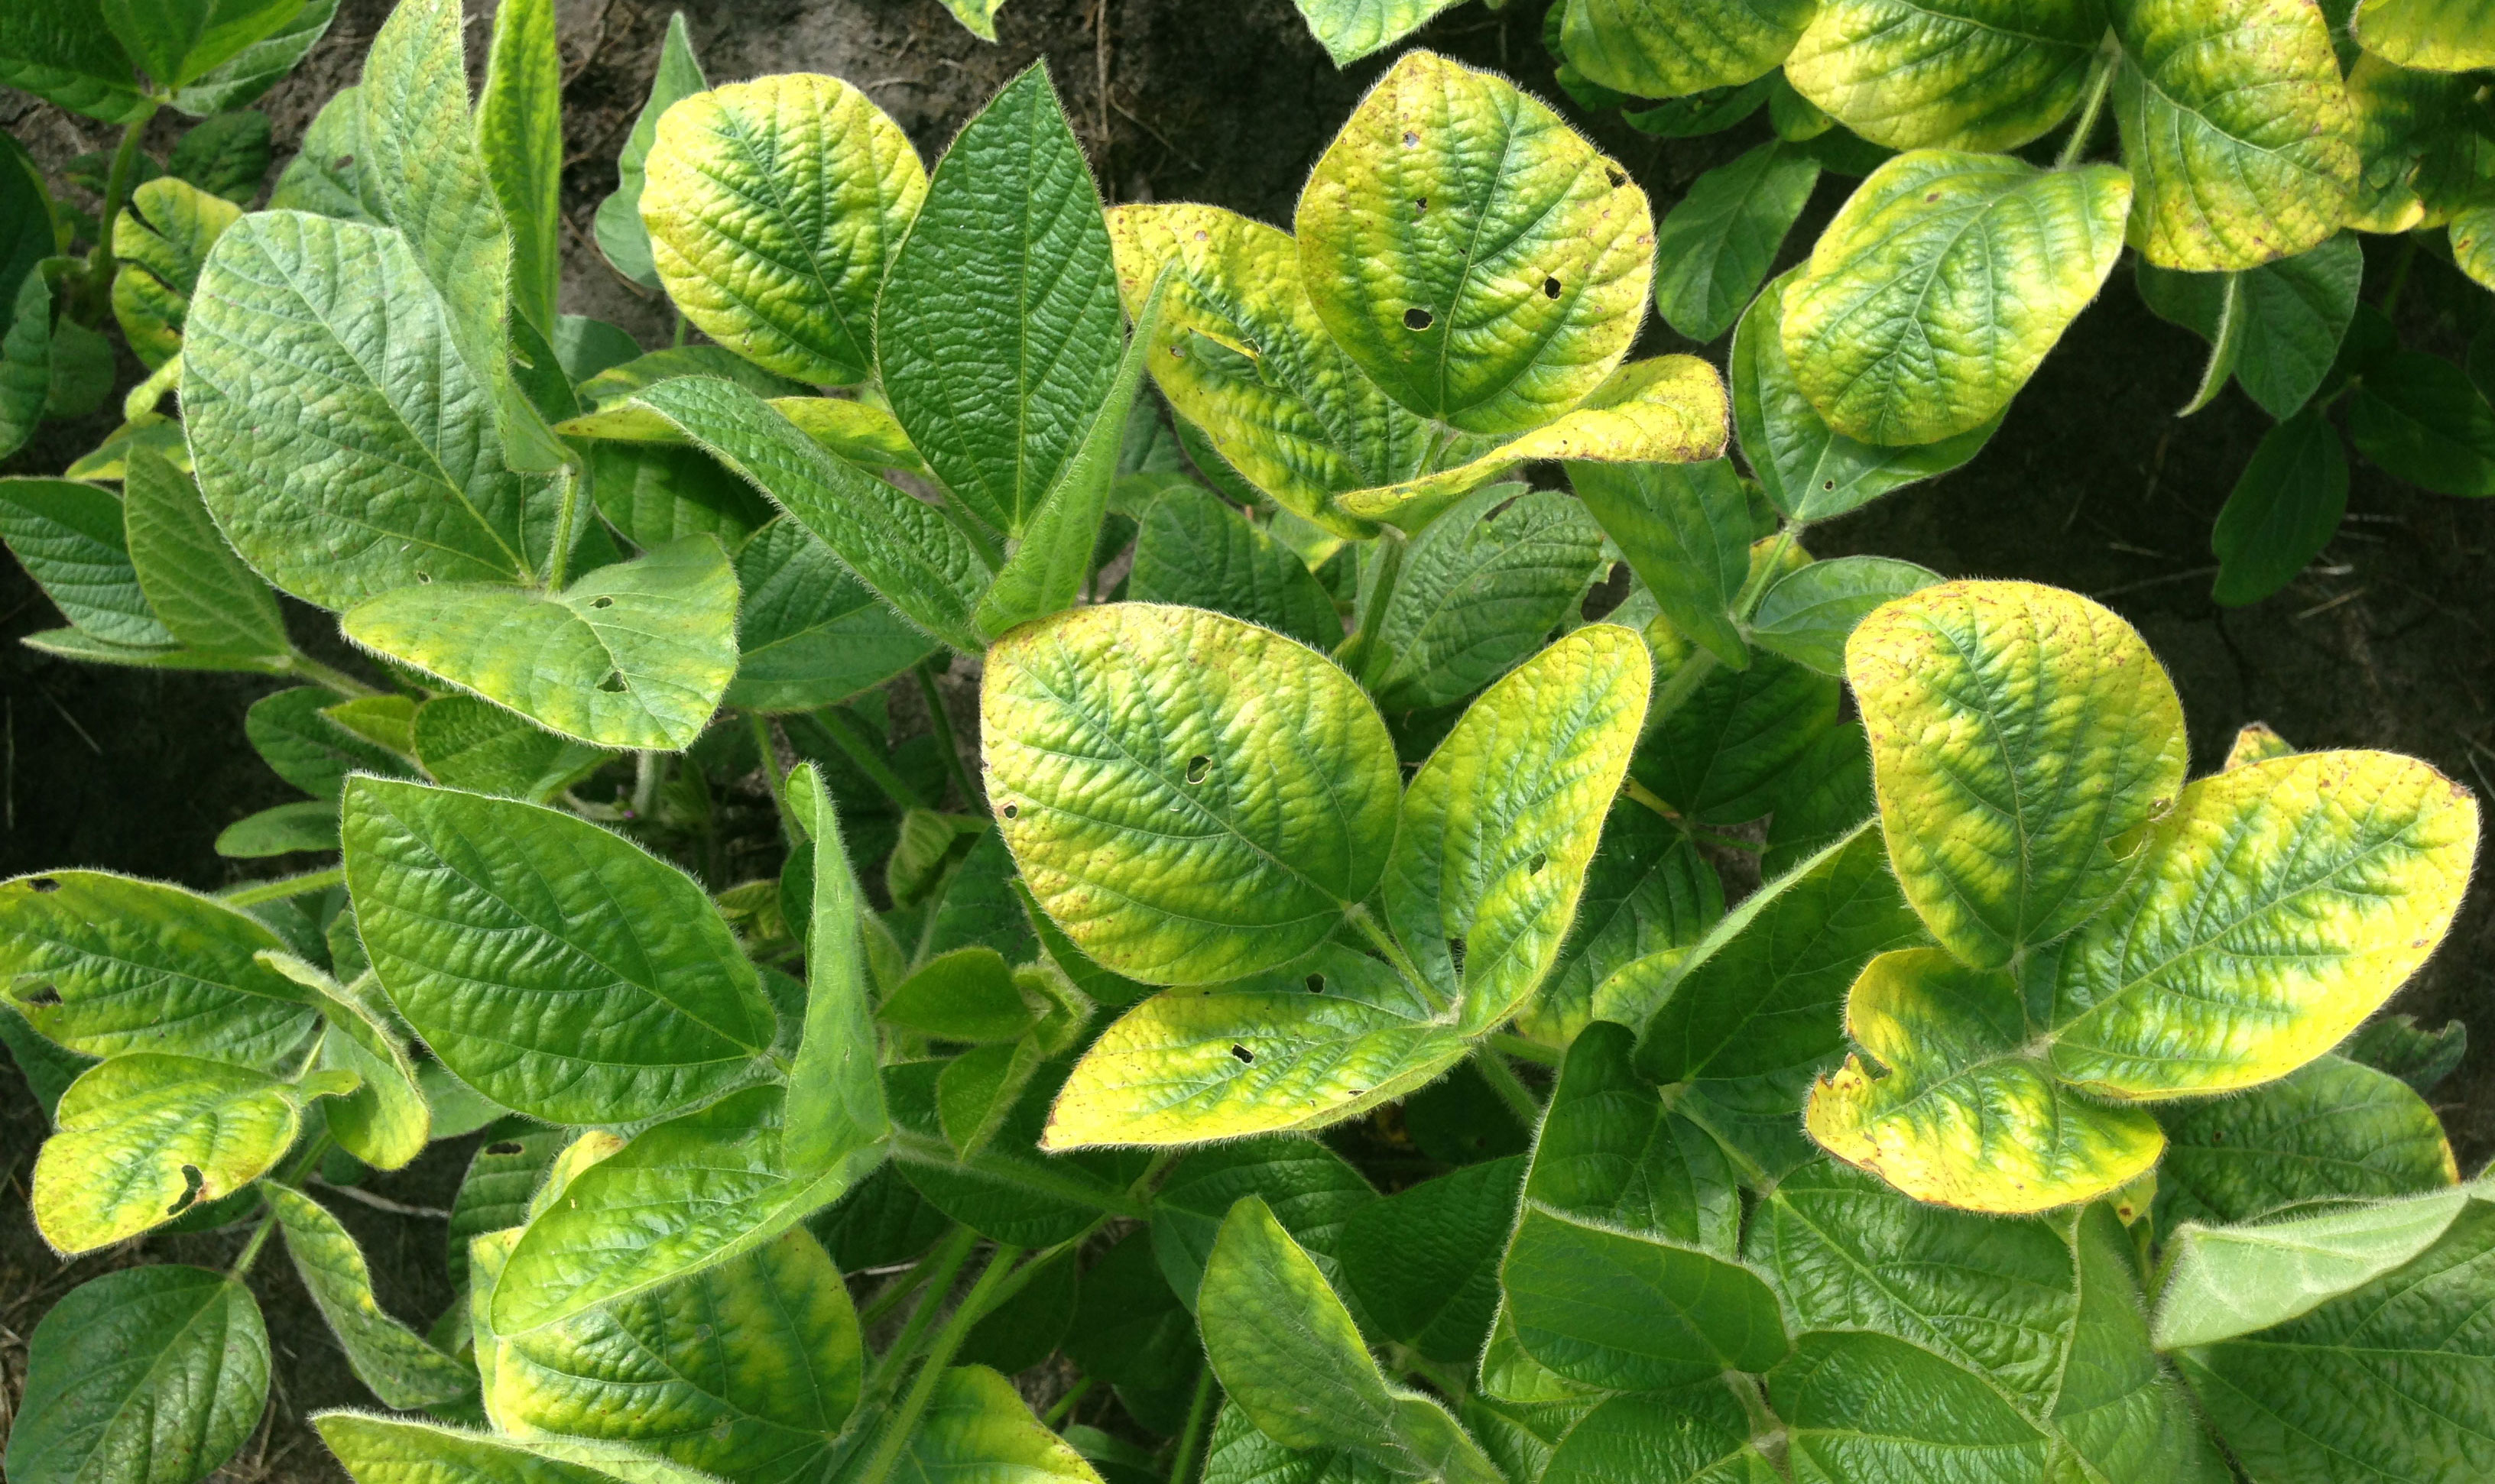 Green soybean plants with increasing yellowing around the edges of their leaves.